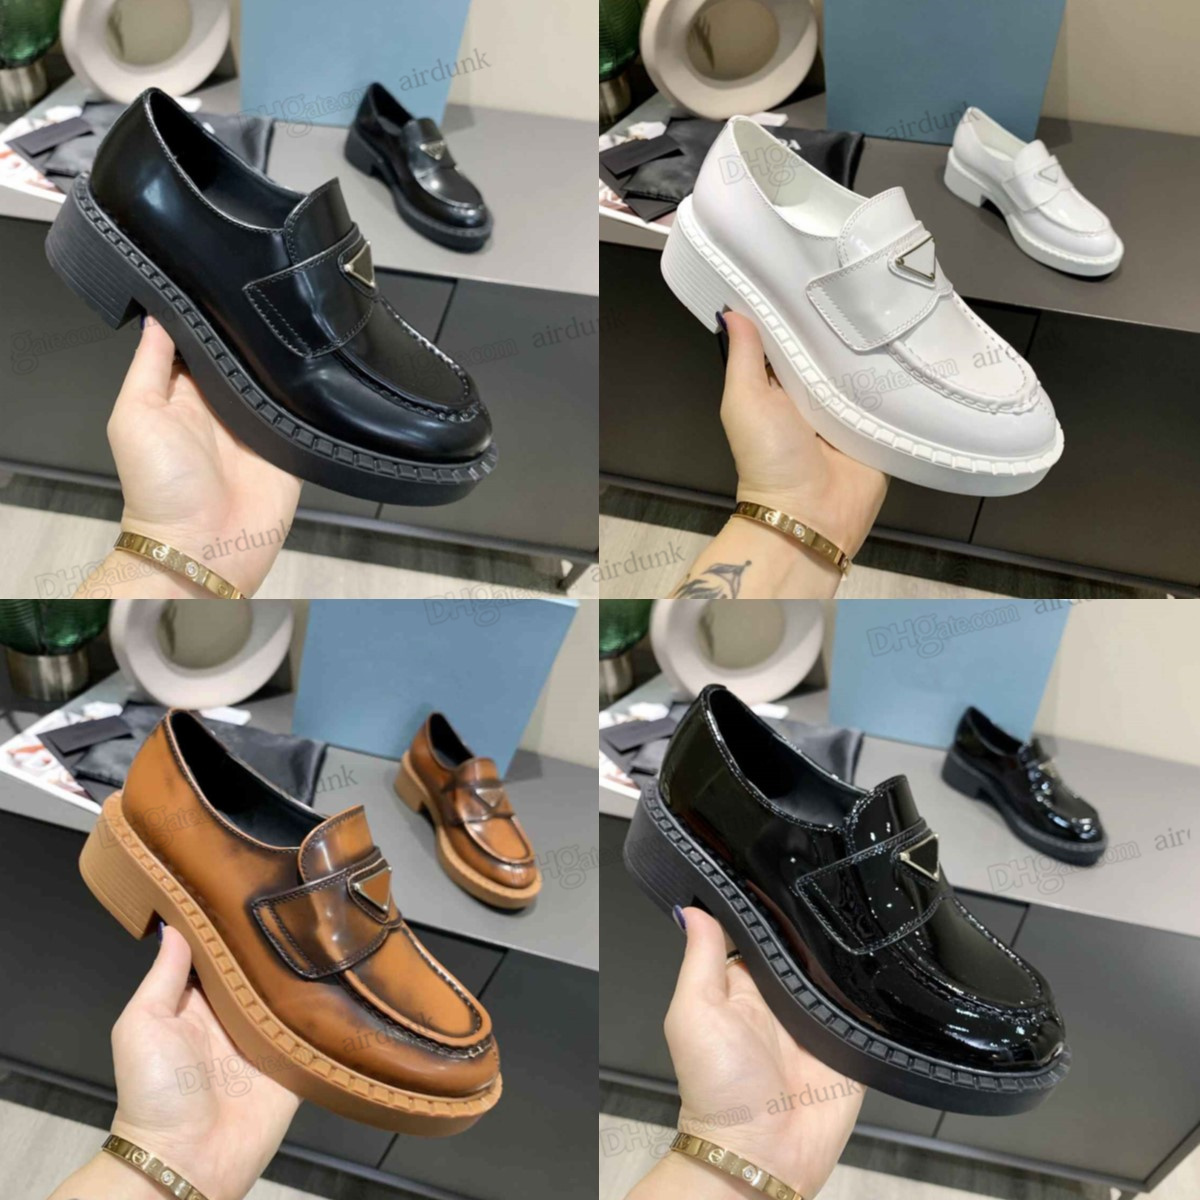 

Fashion Dress Shoes women wedding party quality leather high heel flat Shoe business formal loafer social chunky Black White 2 Color Pgraded Triangle Profile Design, Shoes box